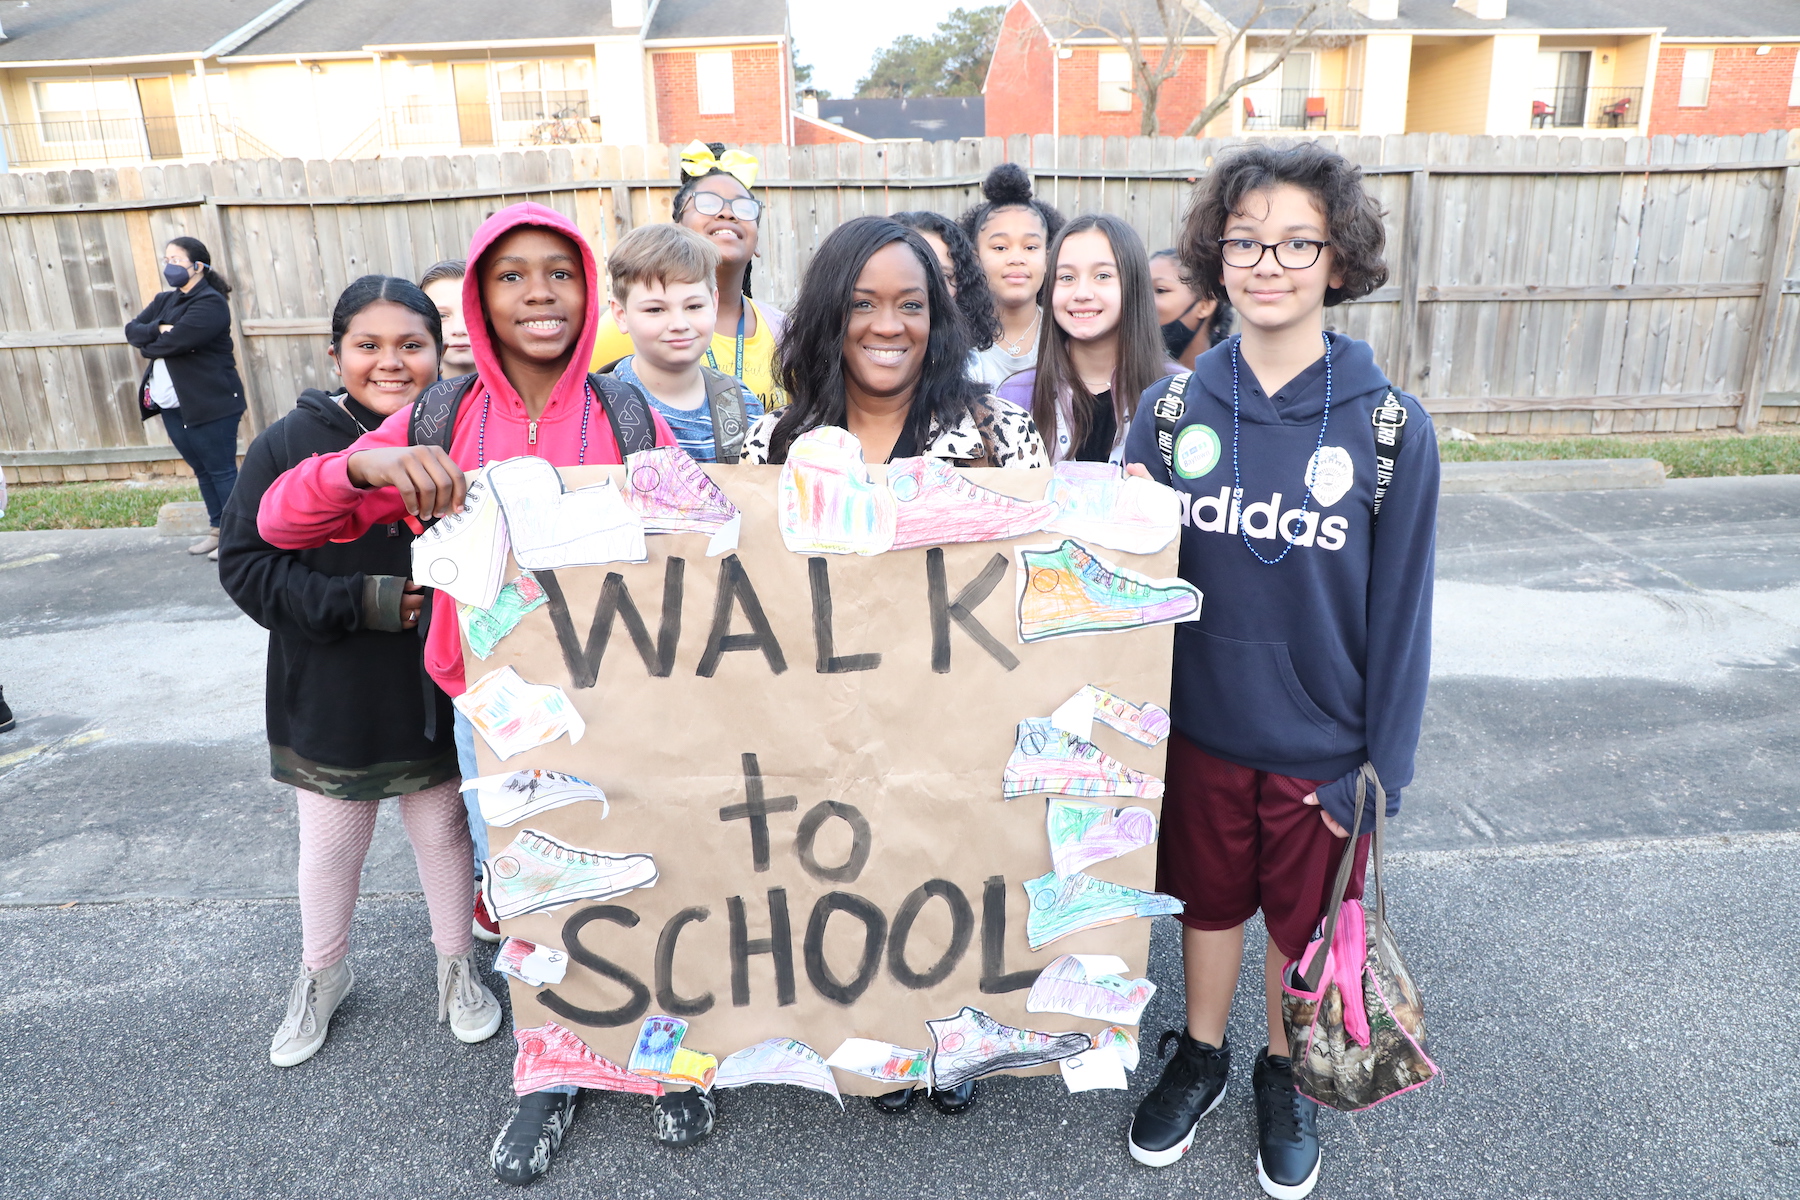 students pose outside with teacher holding a walk to school sign before walking to school